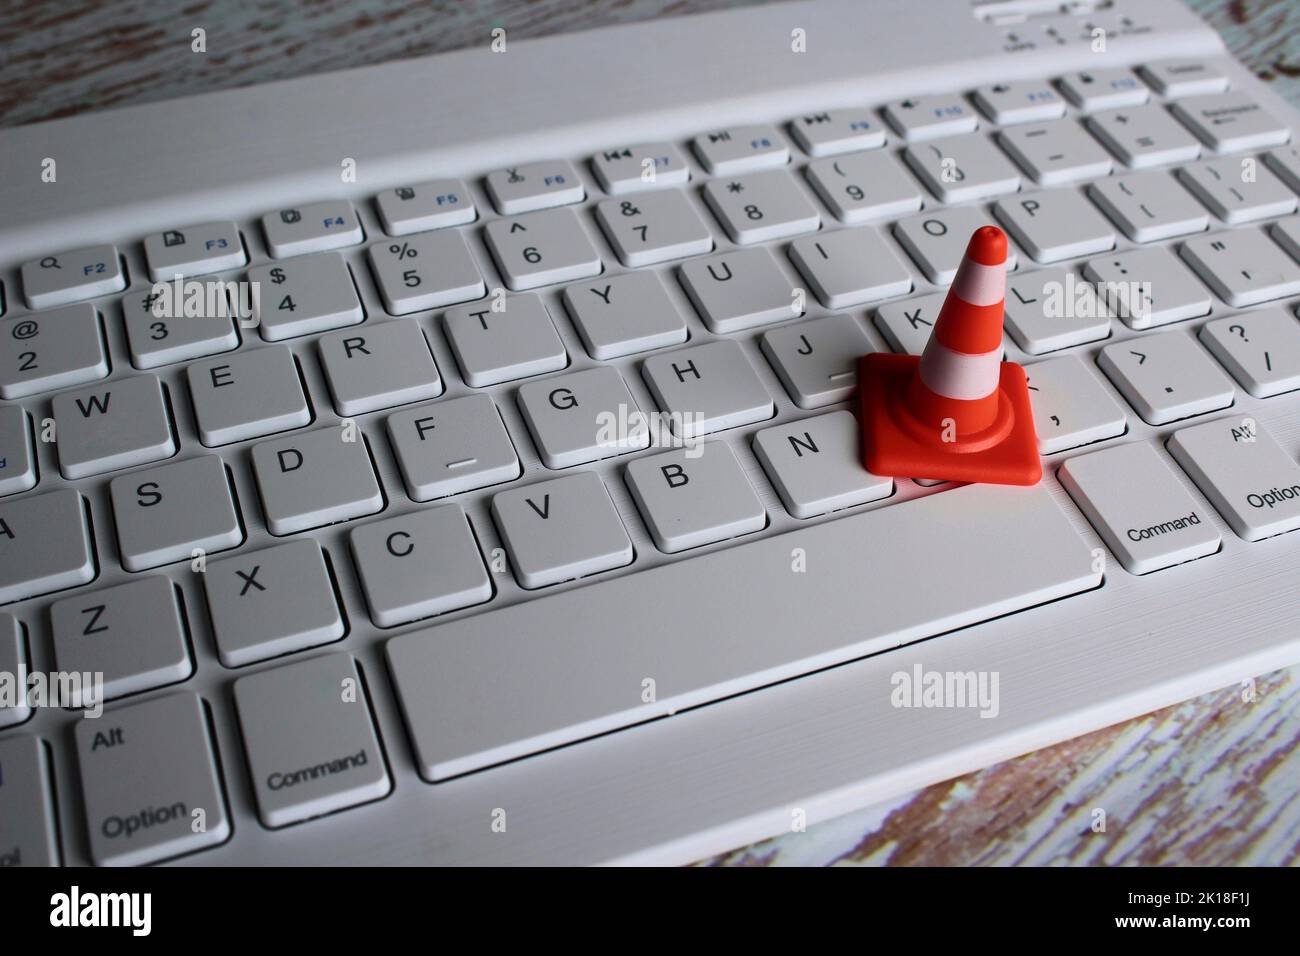 Computer system under construction, maintenance, repair concept. Safety cone and keyboard computer Stock Photo